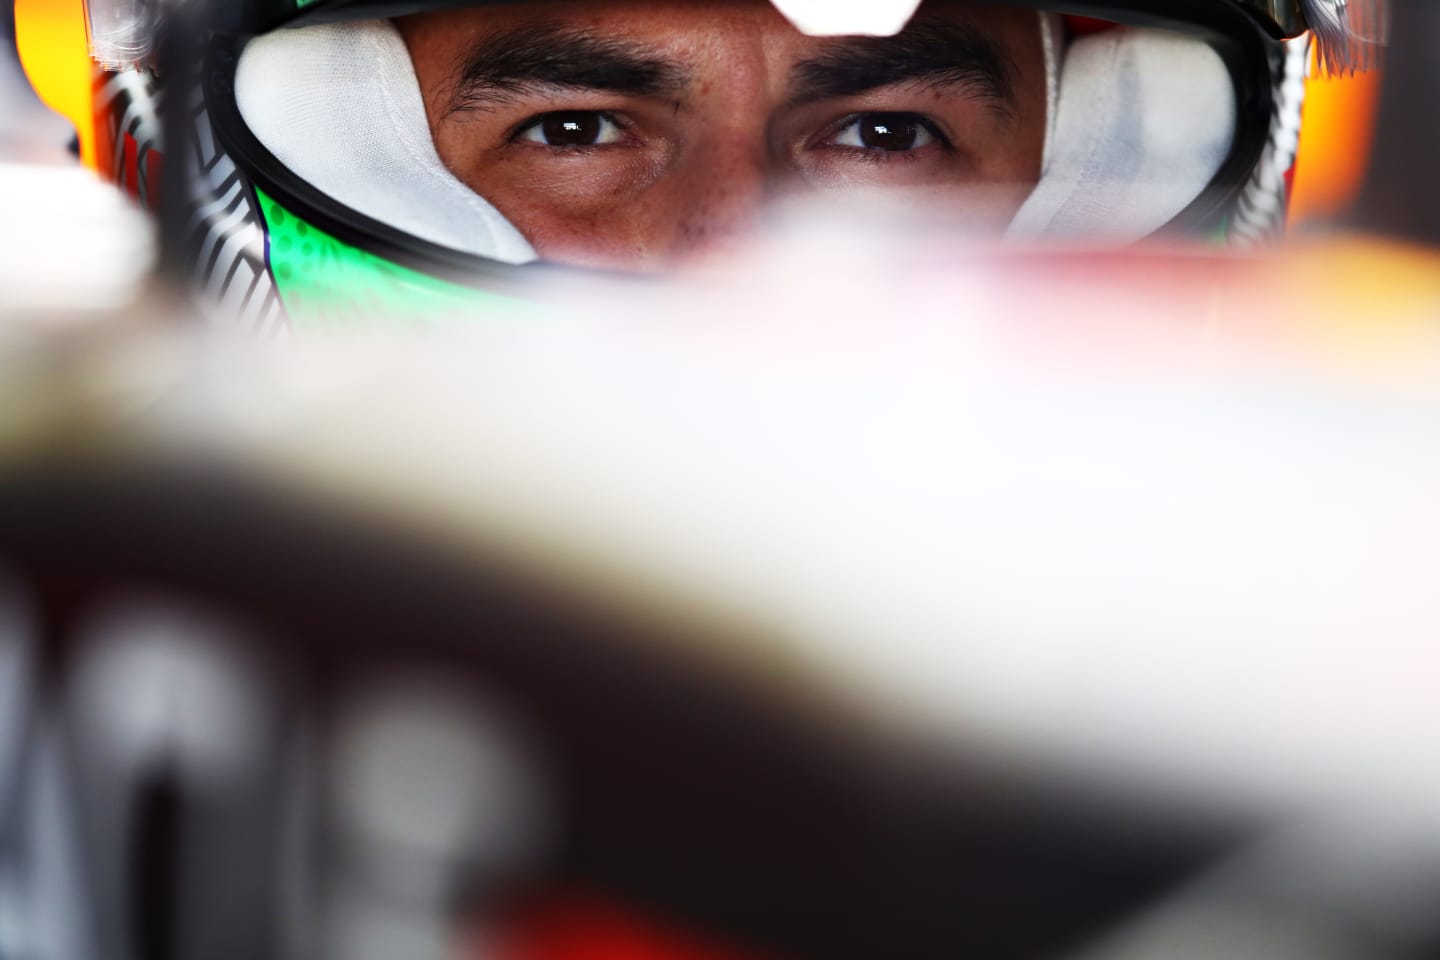 MEXICO CITY, MEXICO - NOVEMBER 06: Sergio Perez of Mexico and Red Bull Racing prepares to drive in the garage during final practice ahead of the F1 Grand Prix of Mexico at Autodromo Hermanos Rodriguez on November 06, 2021 in Mexico City, Mexico. (Photo by Mark Thompson/Getty Images)